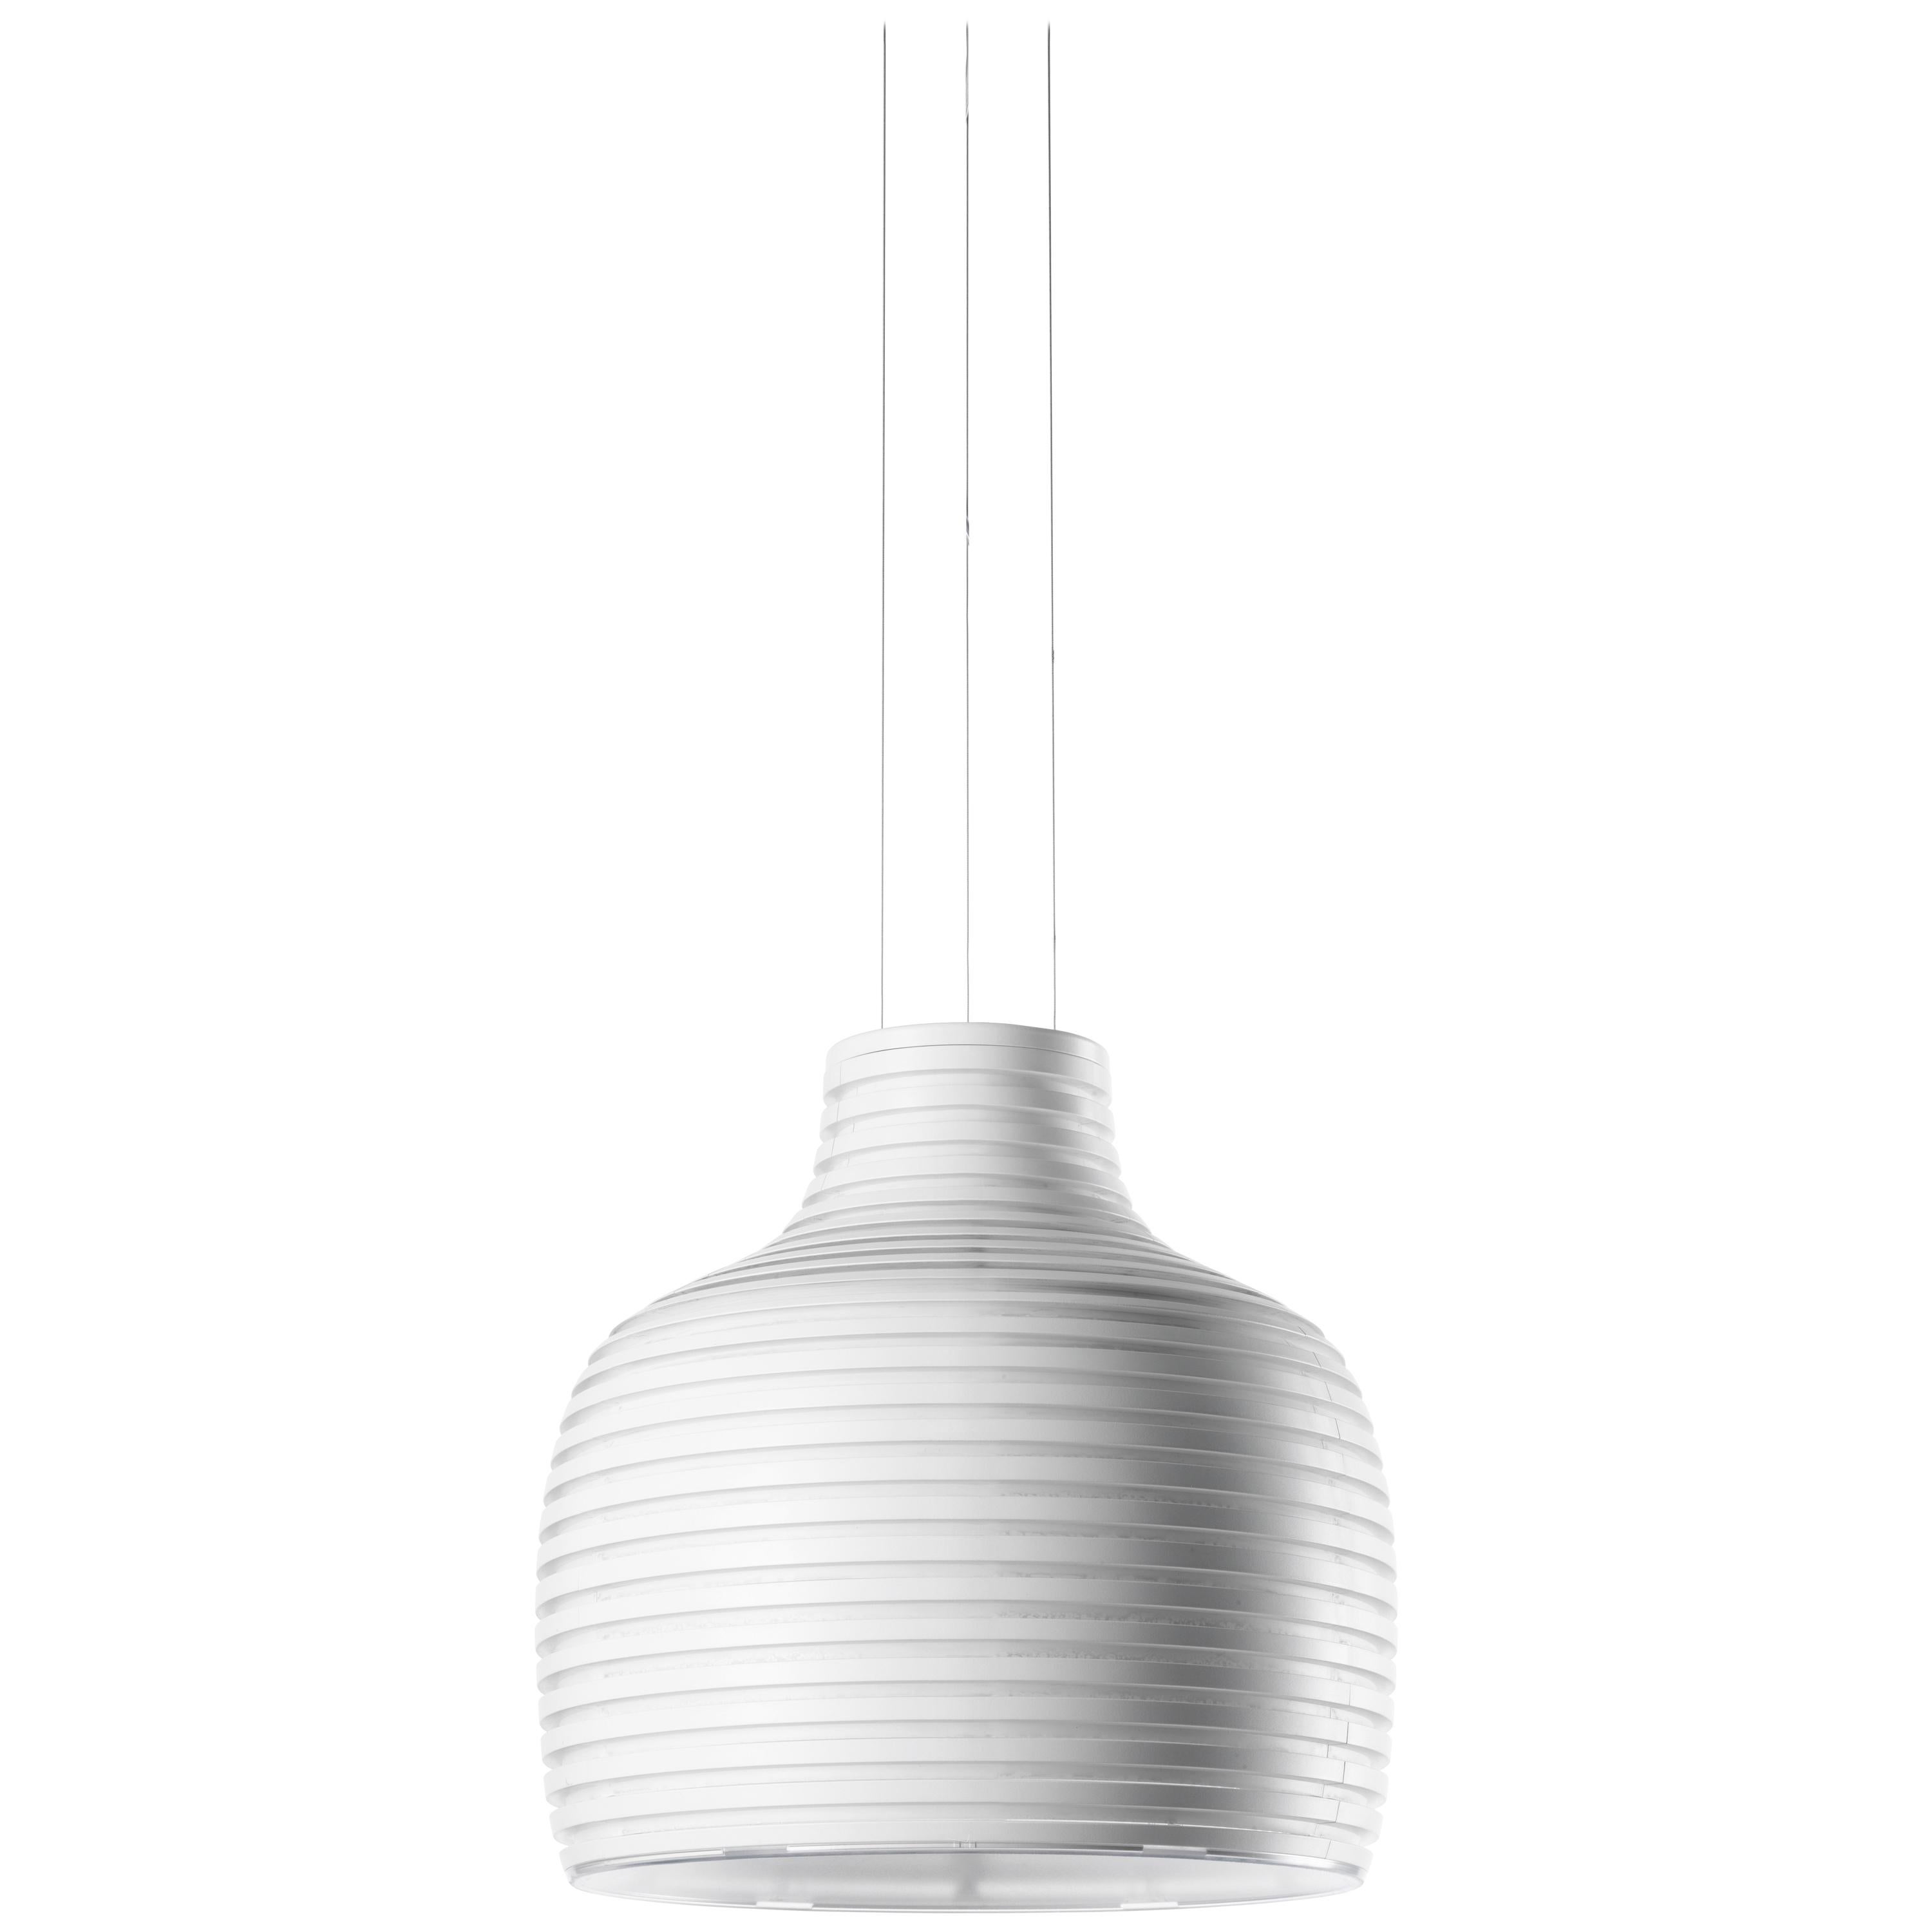 Foscarini Behive Suspension Lamp in White by Werner Aisslinger